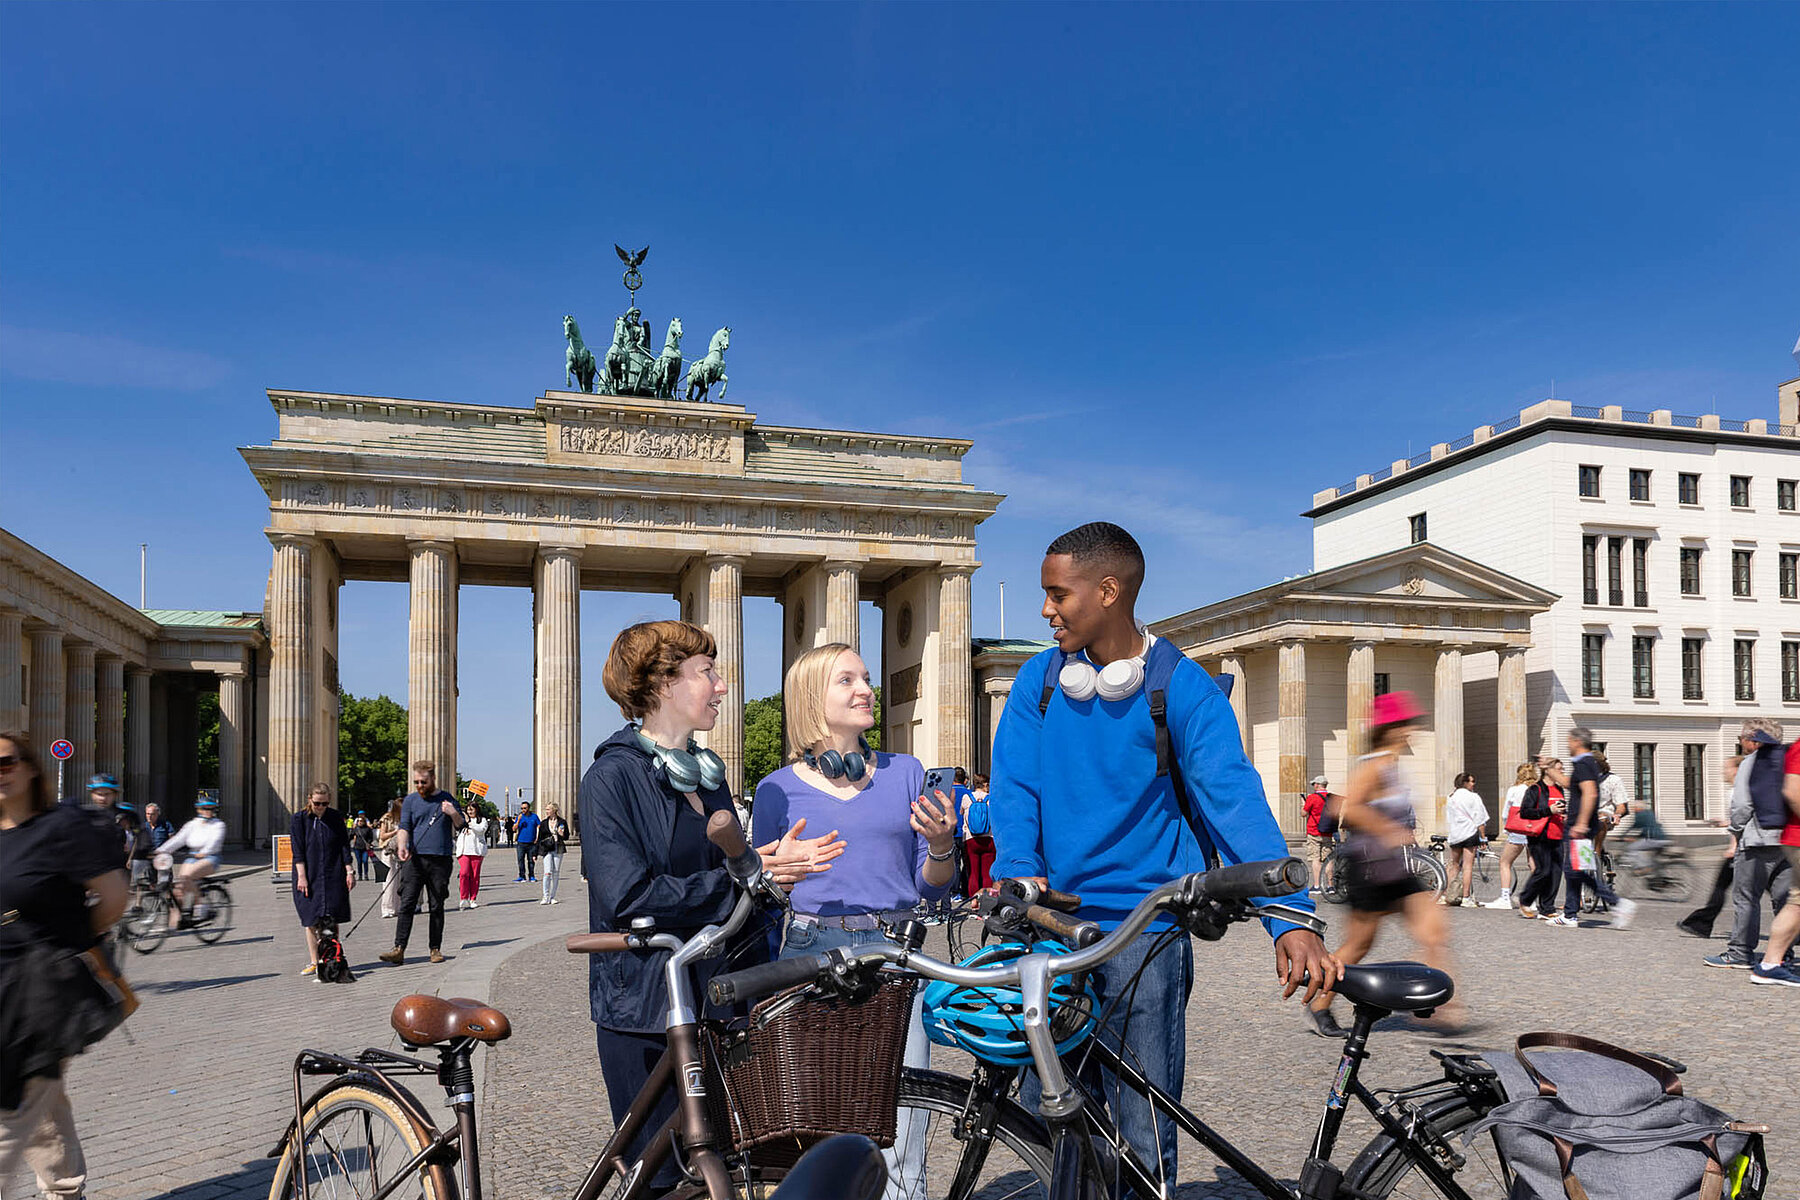 3 people with bicycles are talking in front of the Brandenburg Gate.